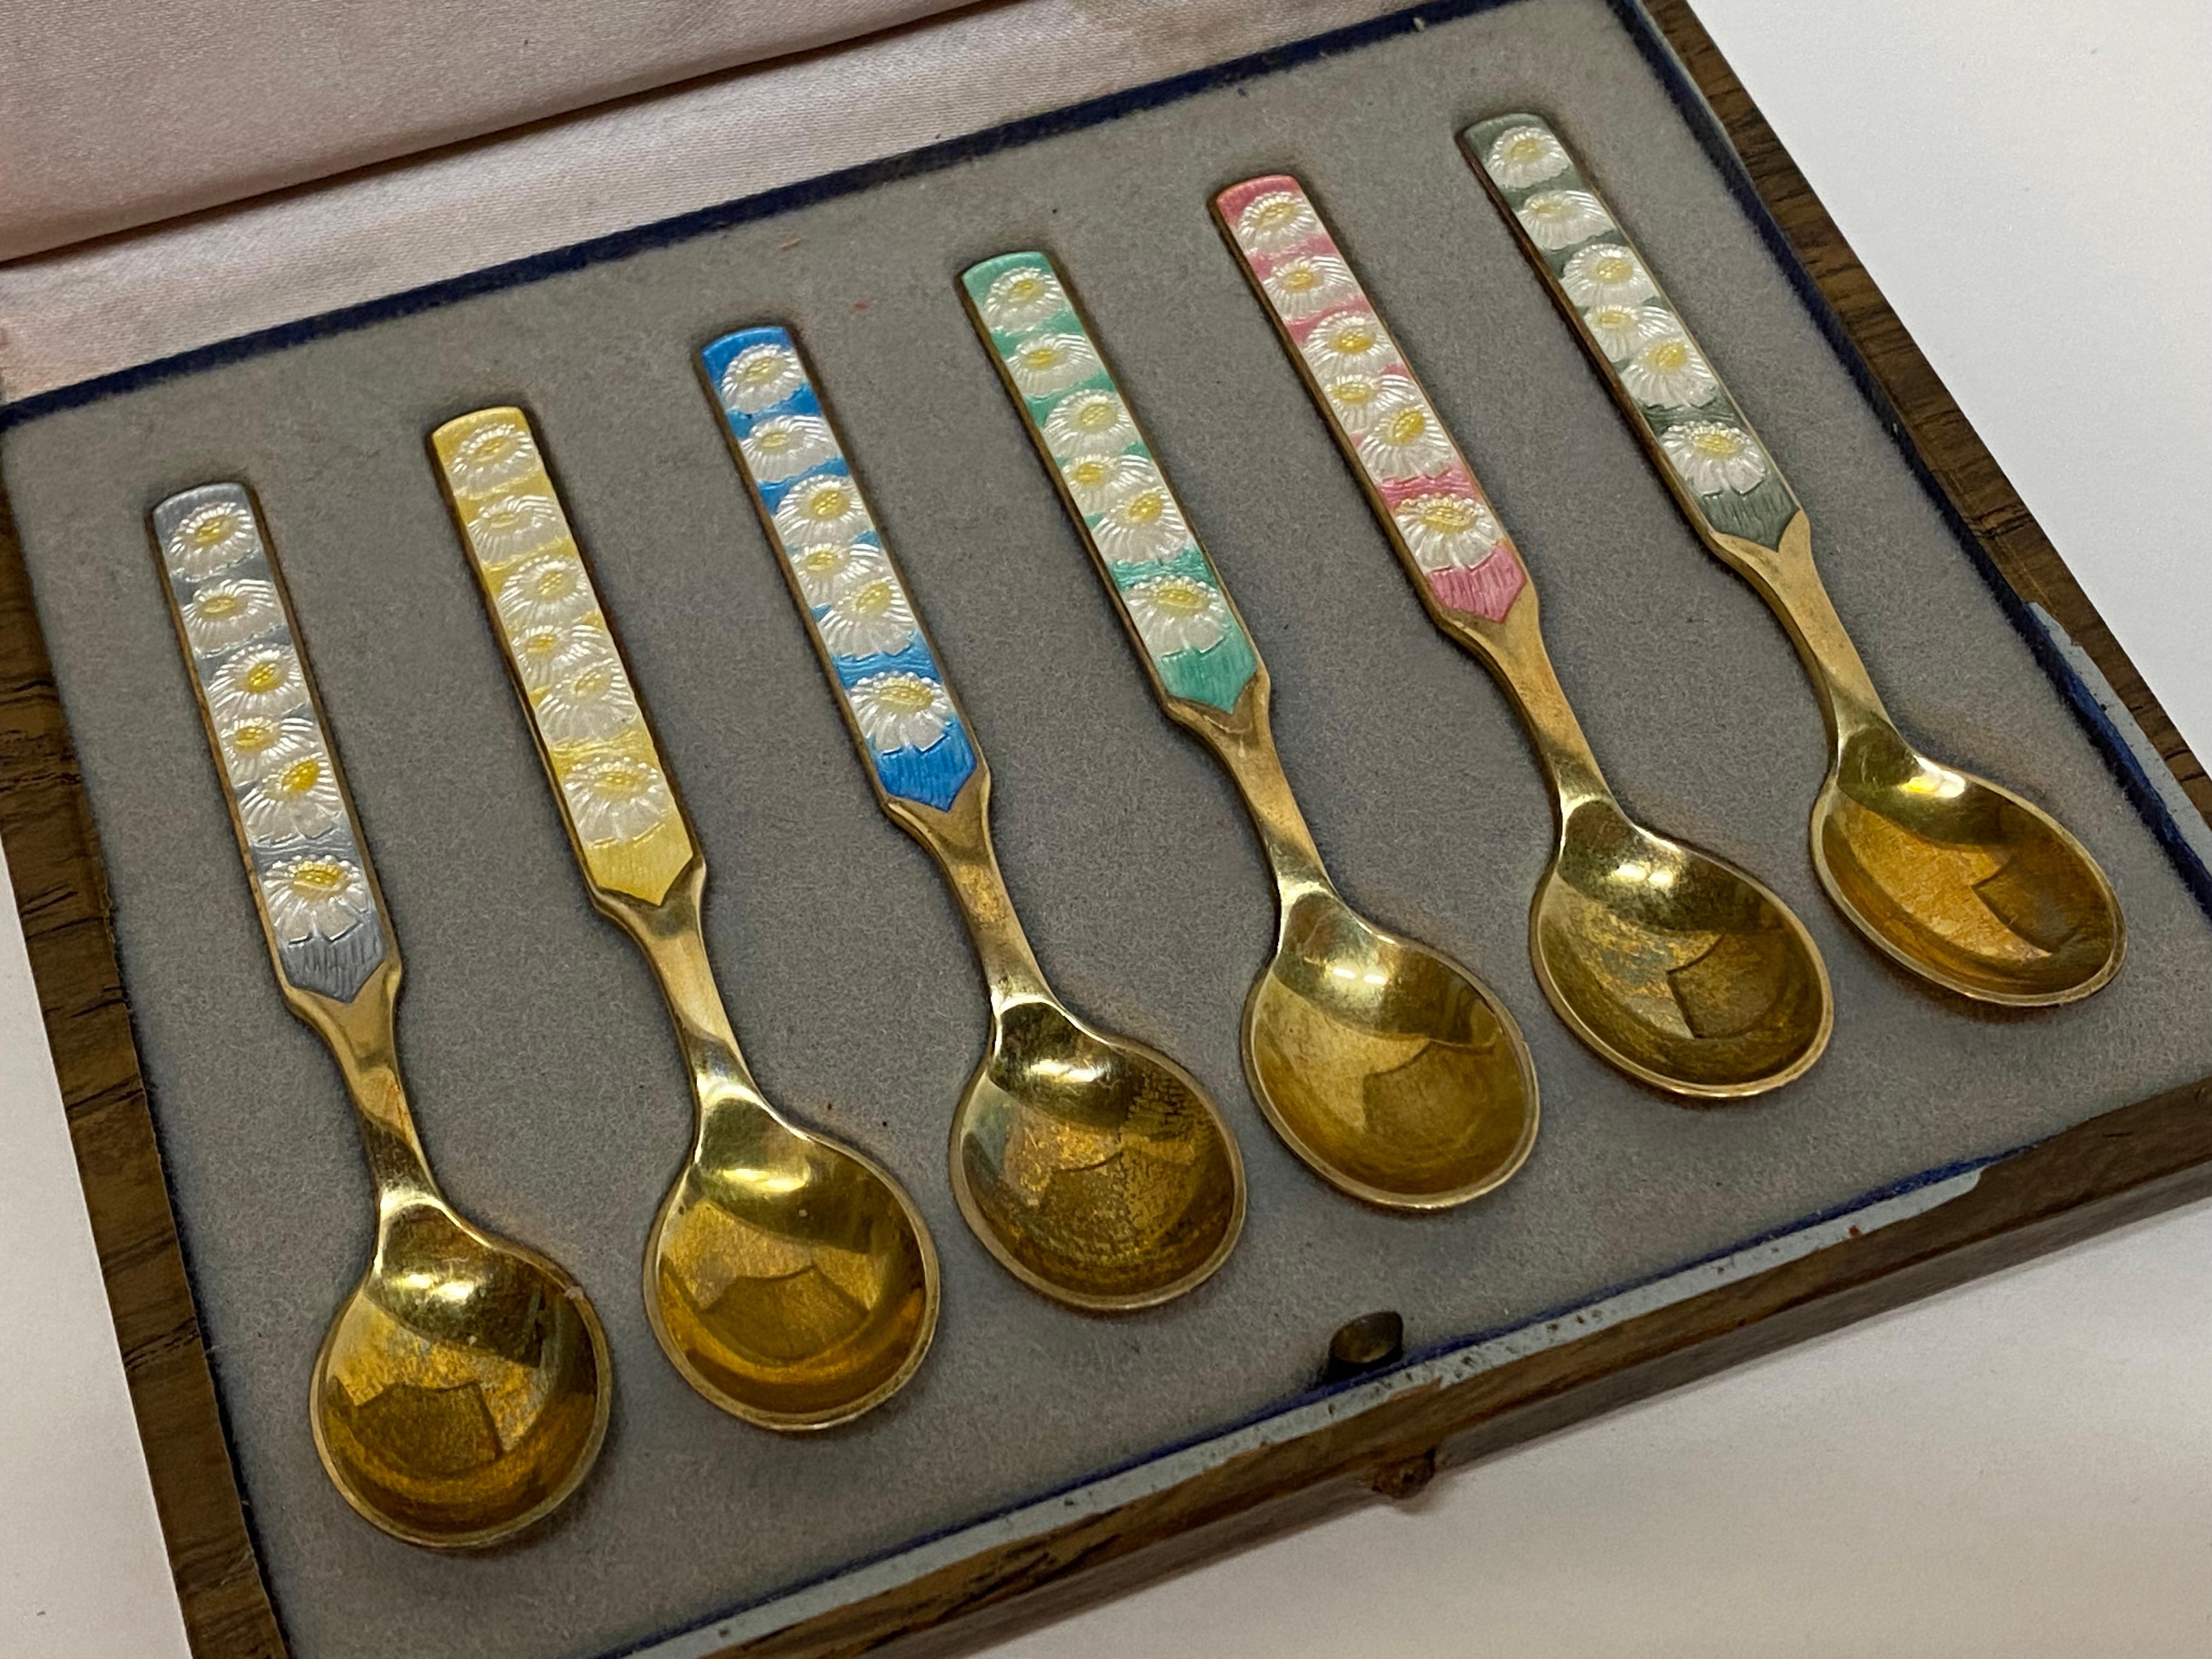 Set of six enameled sterling silver demitasse spoons complete with box. Signed Anton Michelsen, Sterling, Danmark. Circa 1950. Six spoons with enameled floral handles. Good overall condition and possibly never been used. Some tarnish. No visible